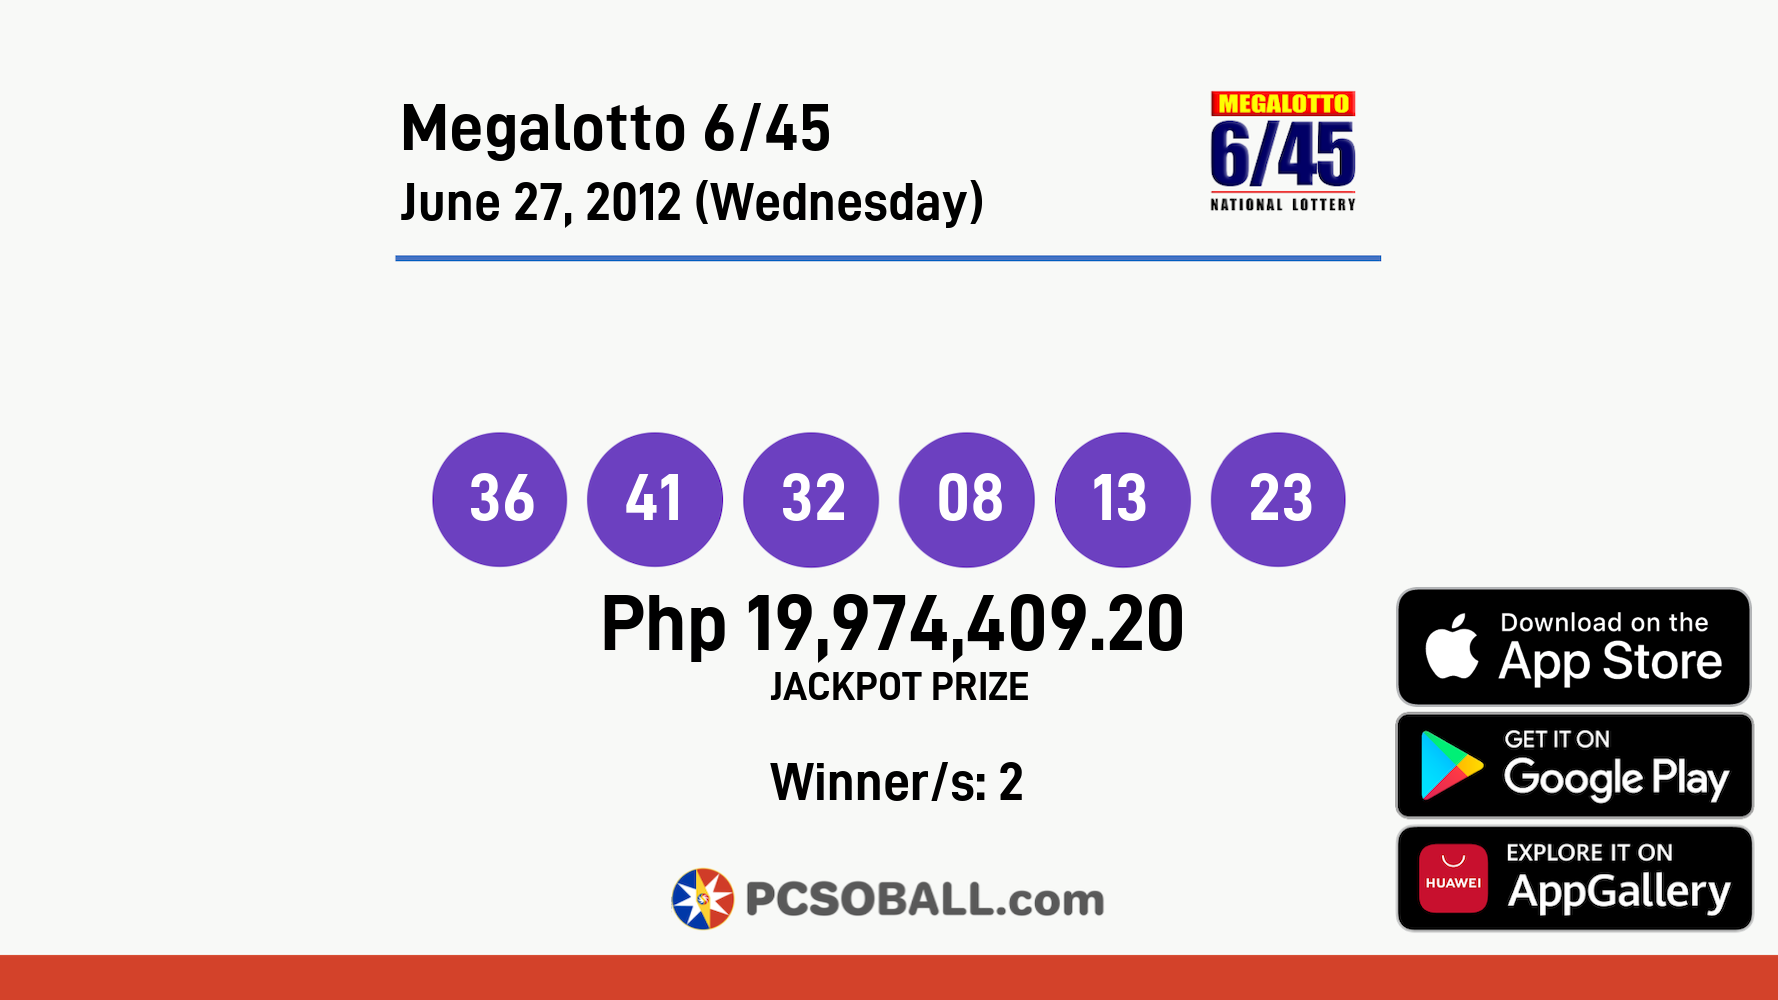 Megalotto 6/45 June 27, 2012 (Wednesday) Result